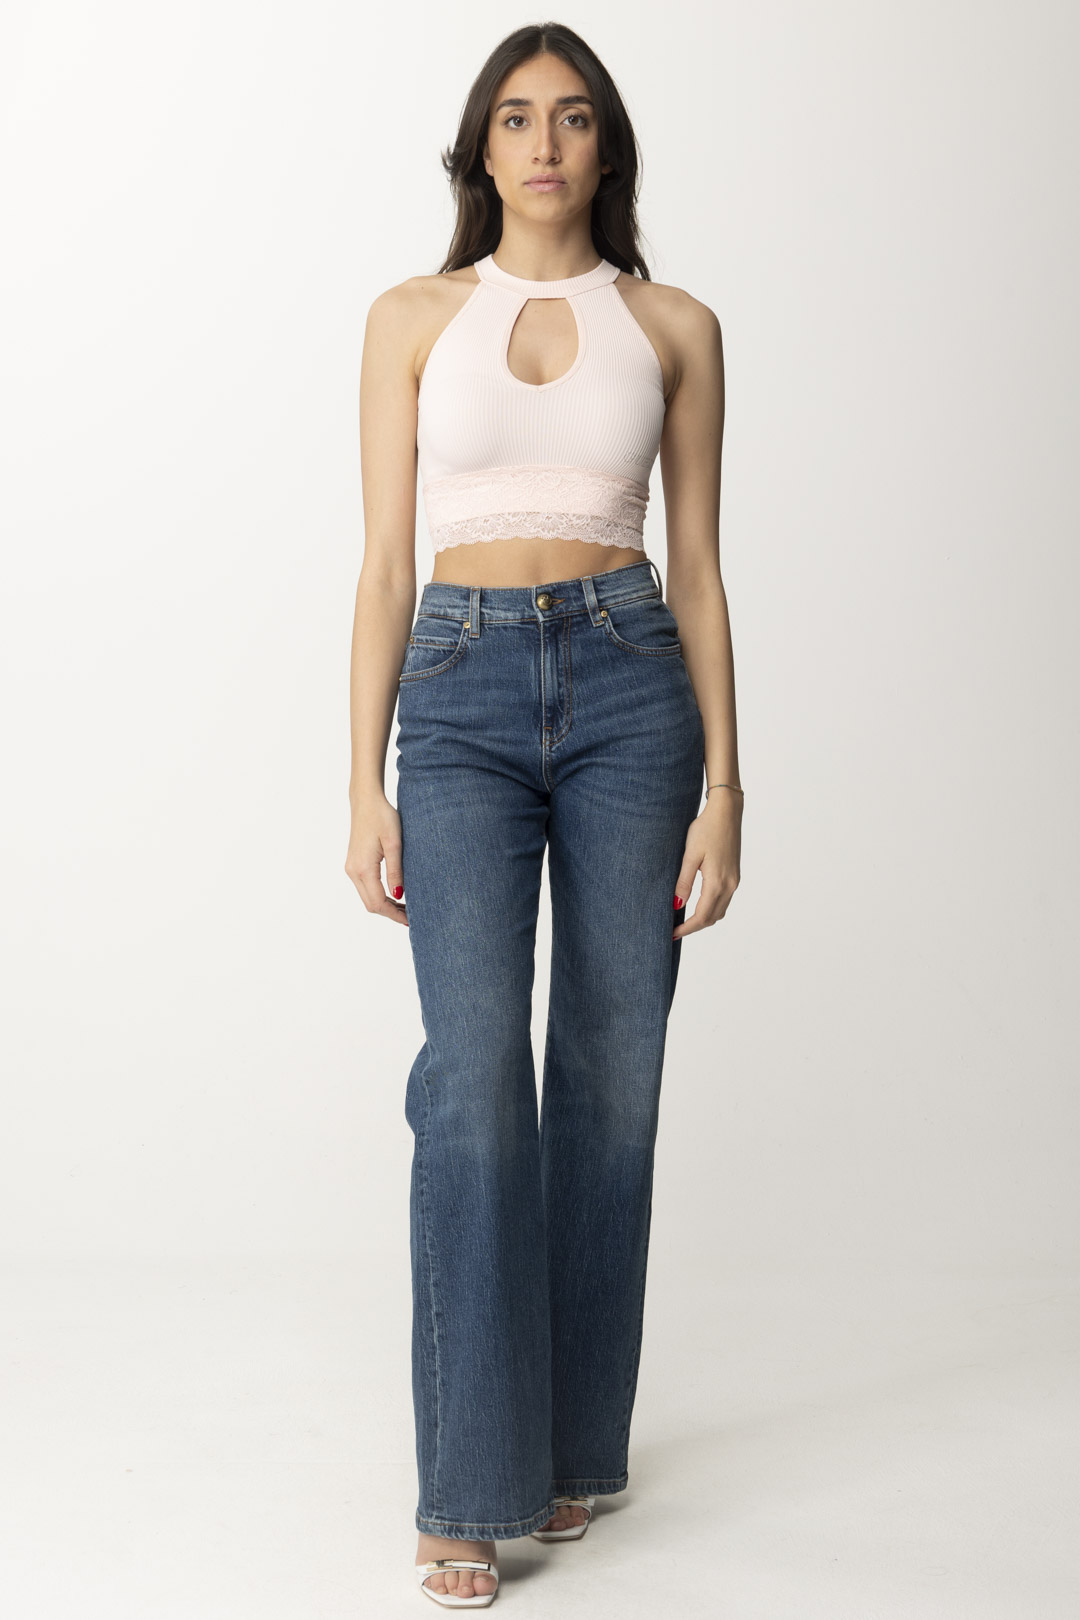 Anteprima: Guess Crop top tricot con orlo in pizzo WANNA BE PINK